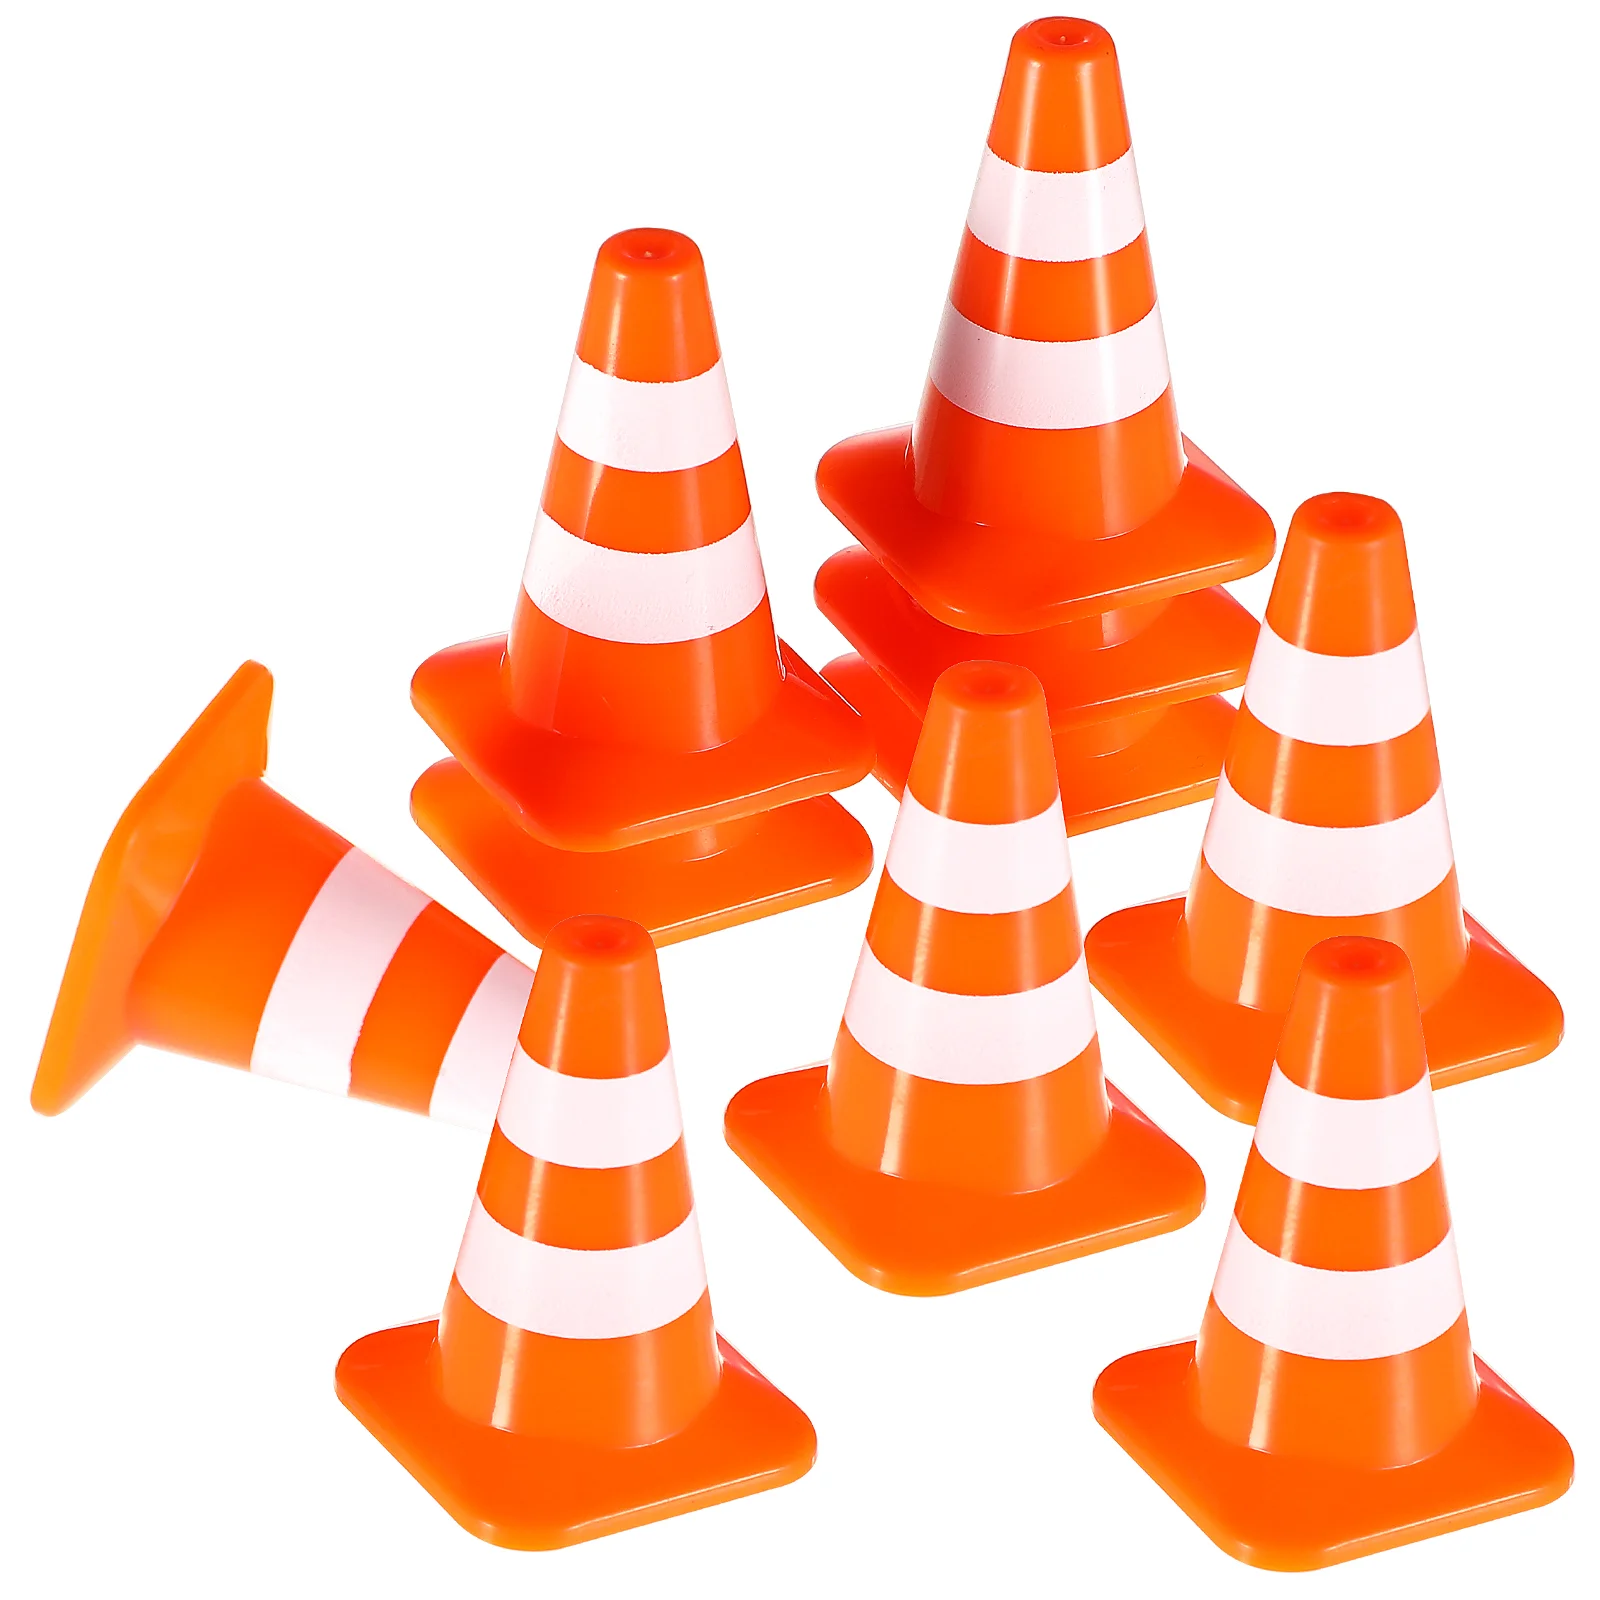 

10 Pcs Toy Road Sign Miniatures Traffic Cones Models Signs Small Toys Conical Plastic Kids Child